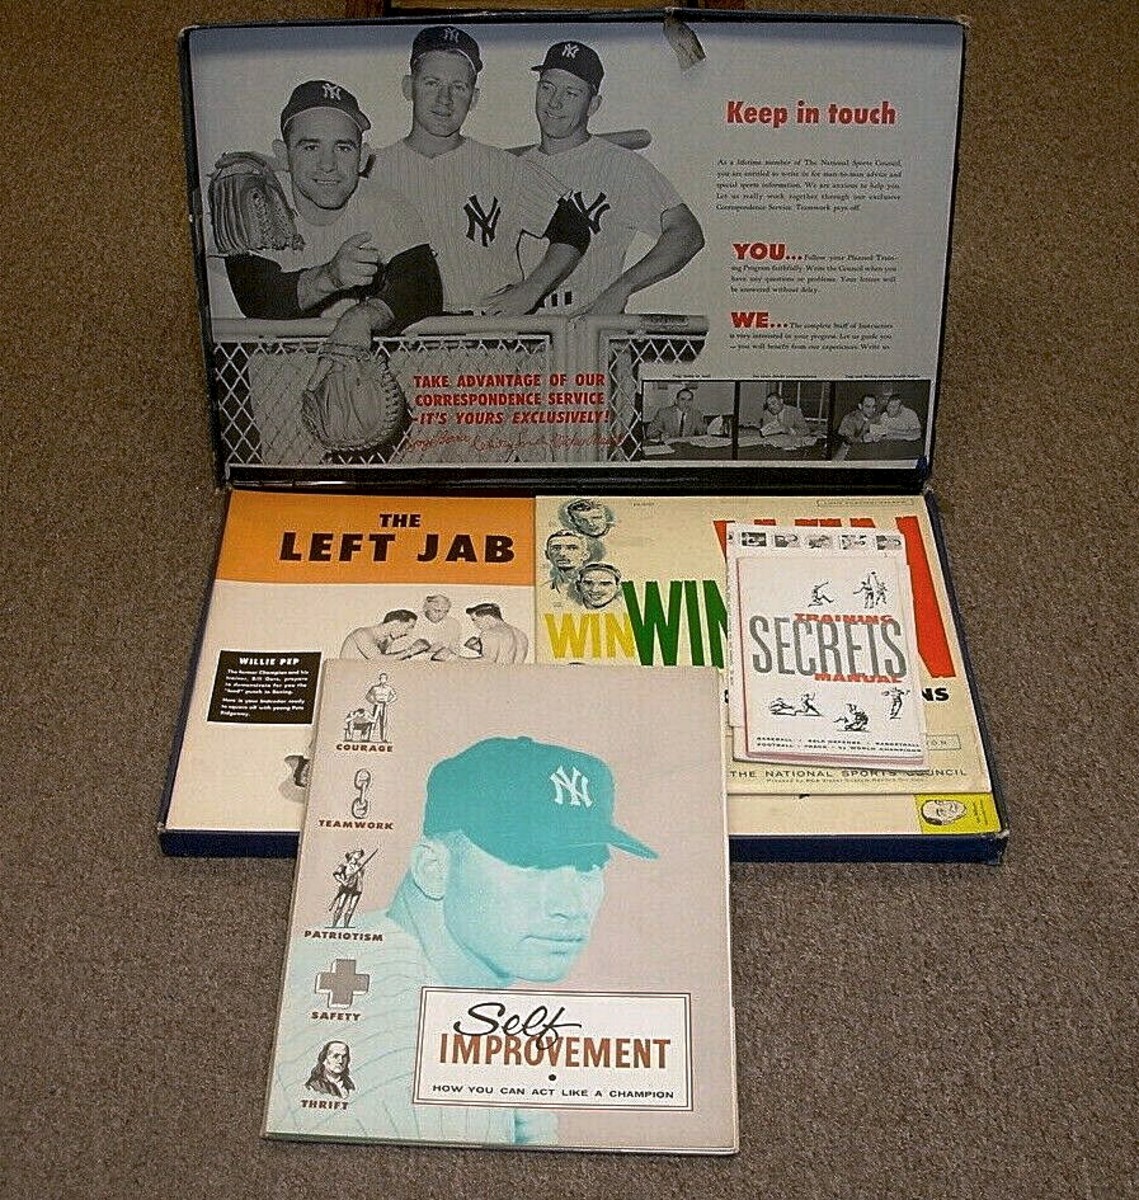 National Sports Council Manly Work Out Program materials featuring Mickey Mantle.